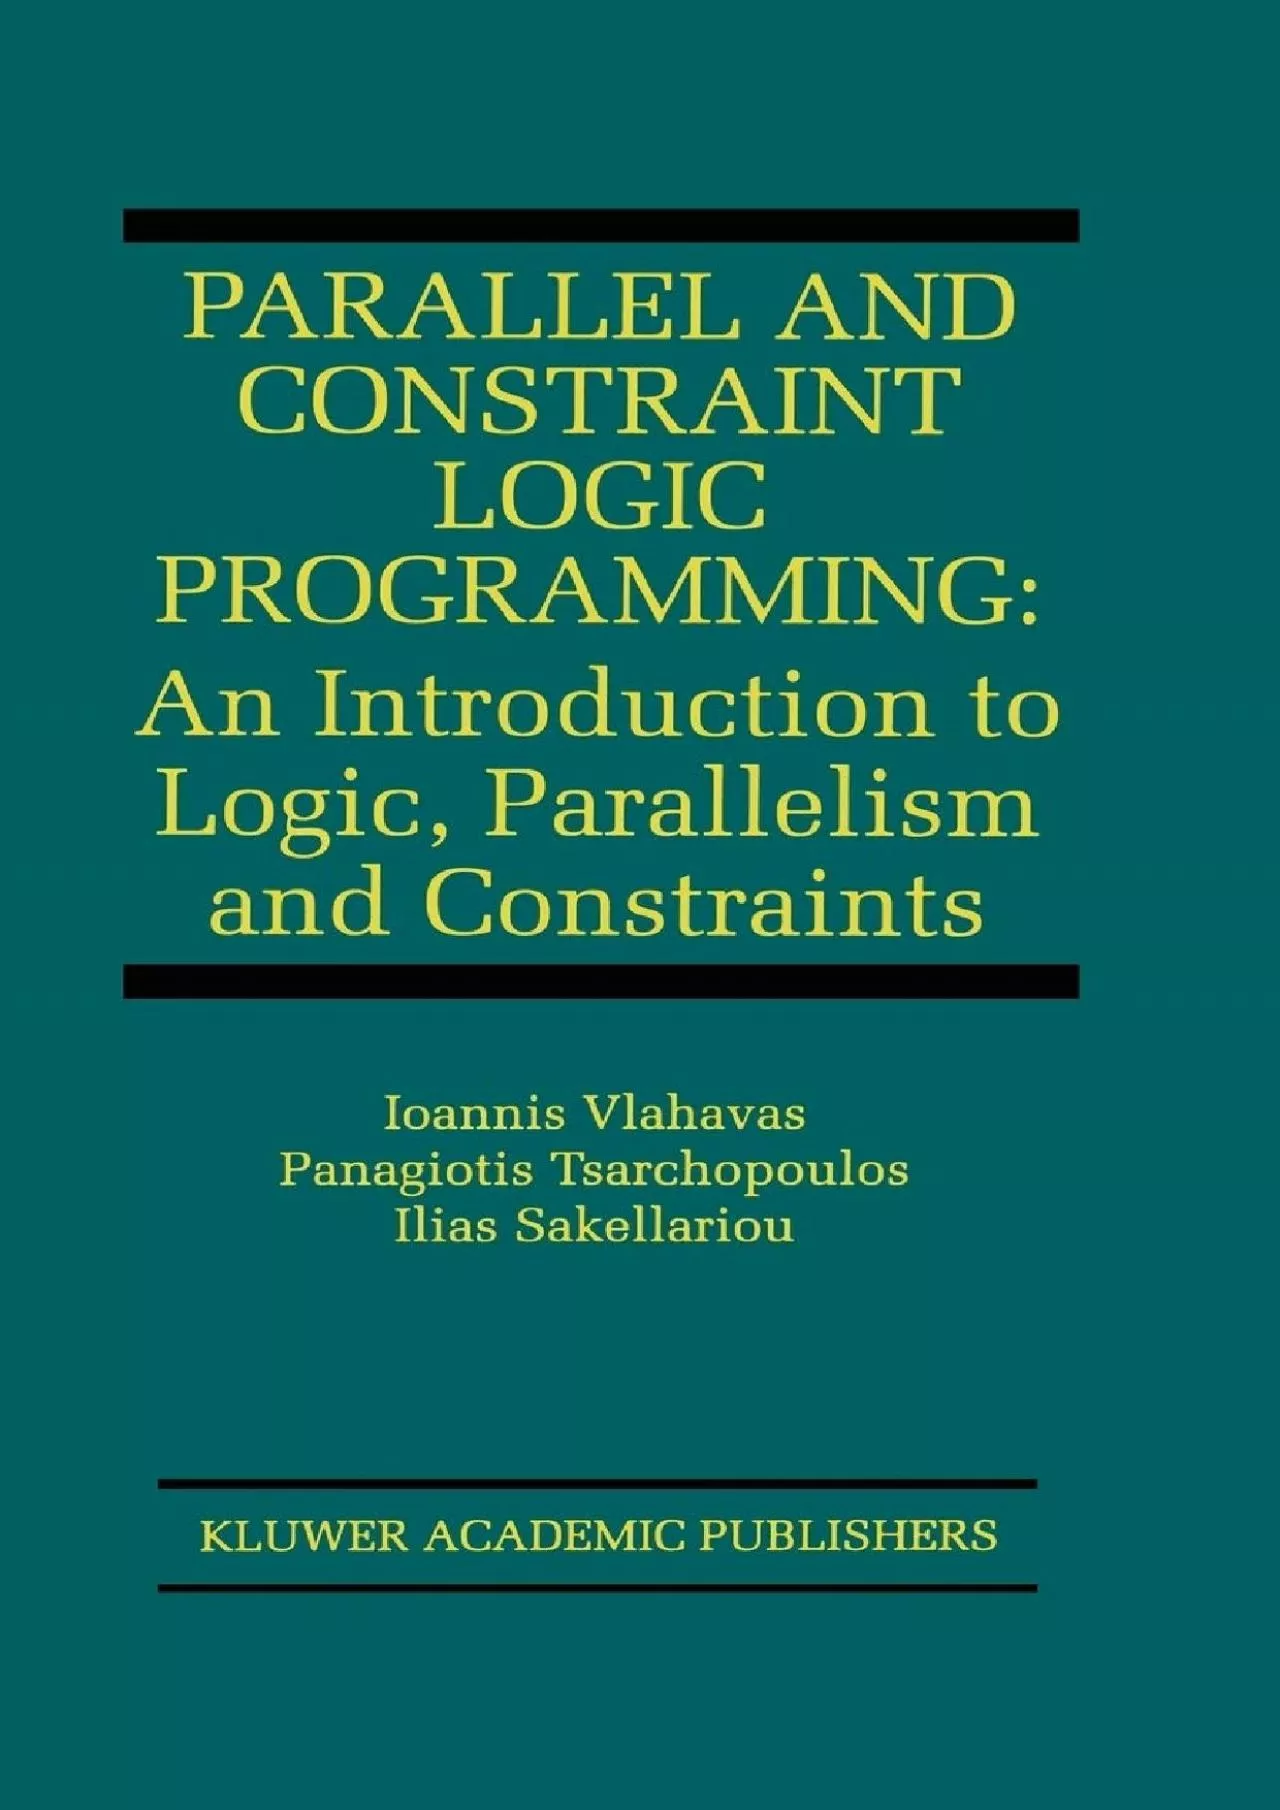 [eBOOK]-Parallel and Constraint Logic Programming: An Introduction to Logic, Parallelism